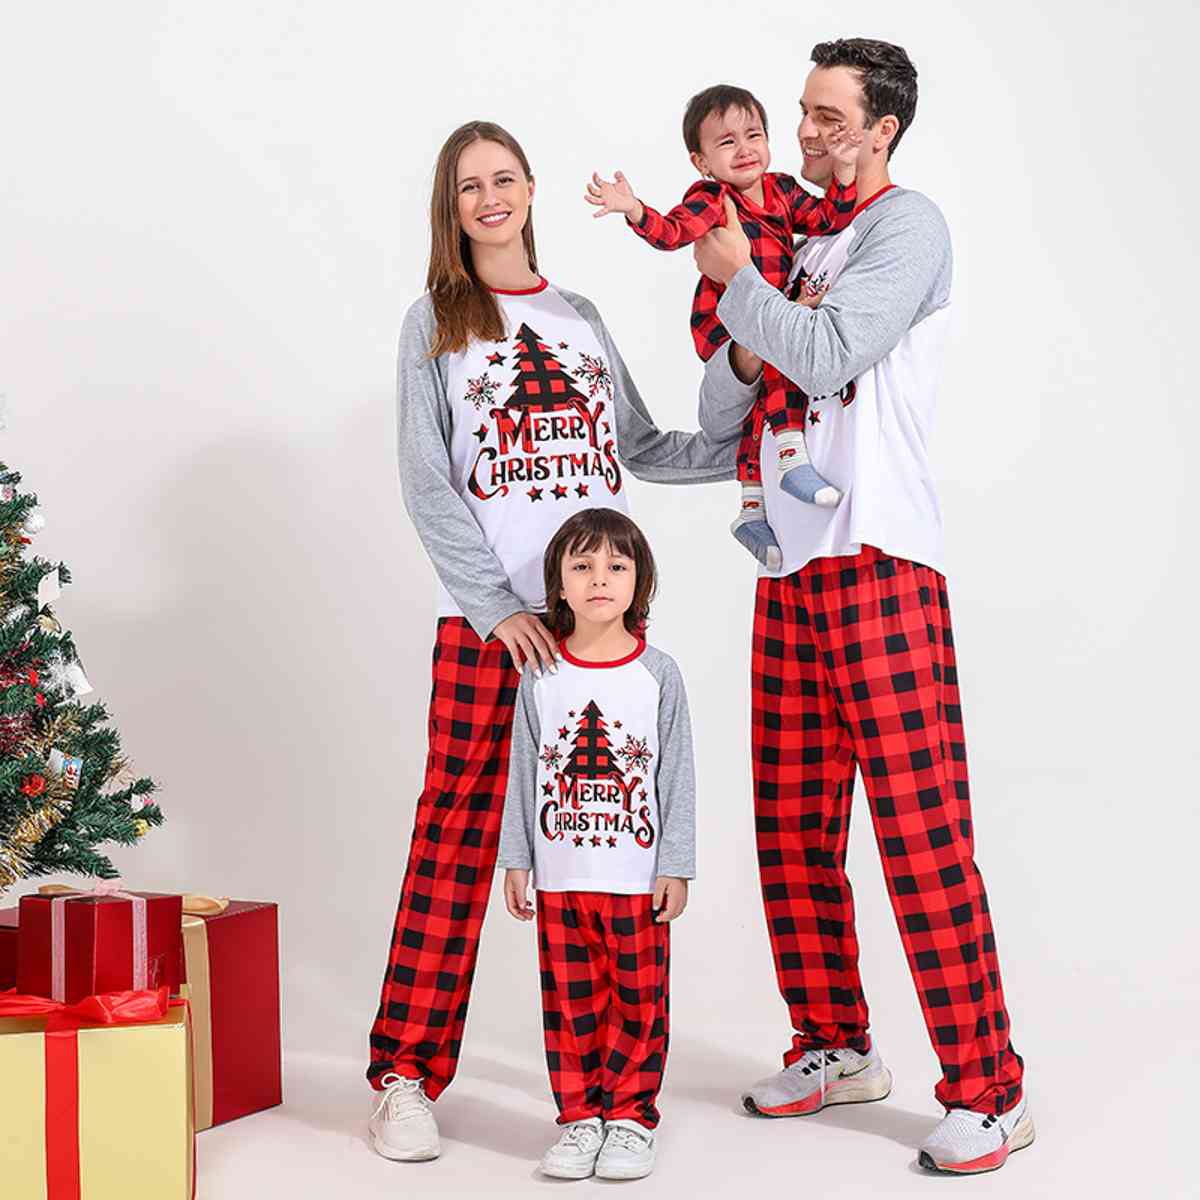 MERRY CHRISTMAS Graphic Top and Plaid Pajama Set for Men  Krazy Heart Designs Boutique   